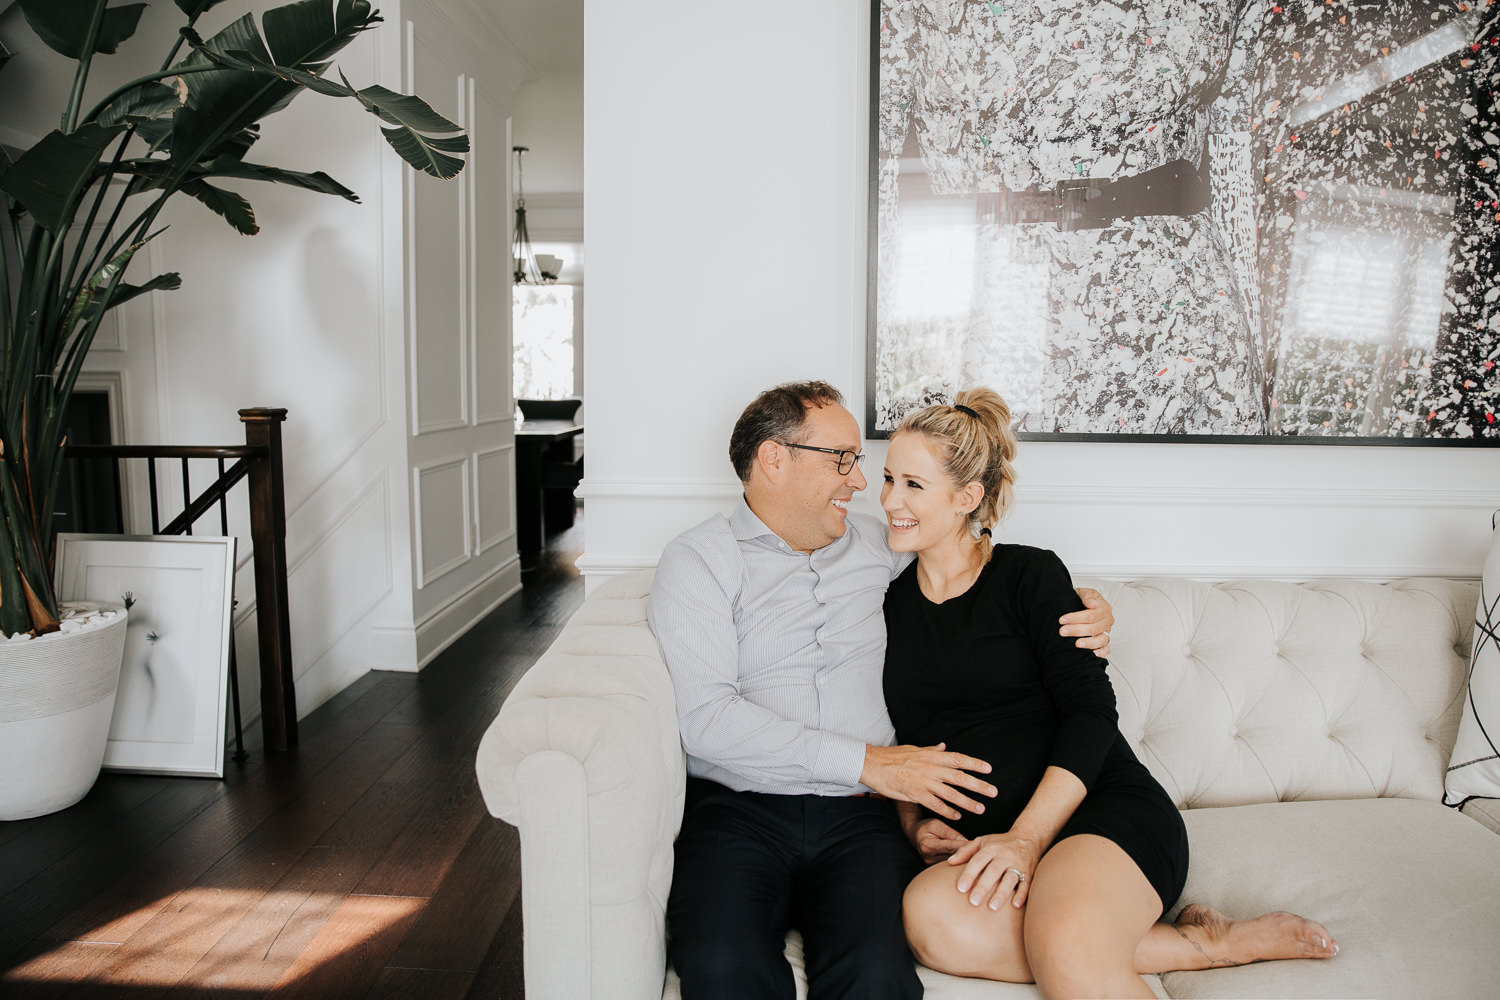 couple sitting together on couch smiling at one another, husband's hand on pregnant wife's belly, woman wearing black dress and blonde hair in braid - Stouffville In-Home Photography